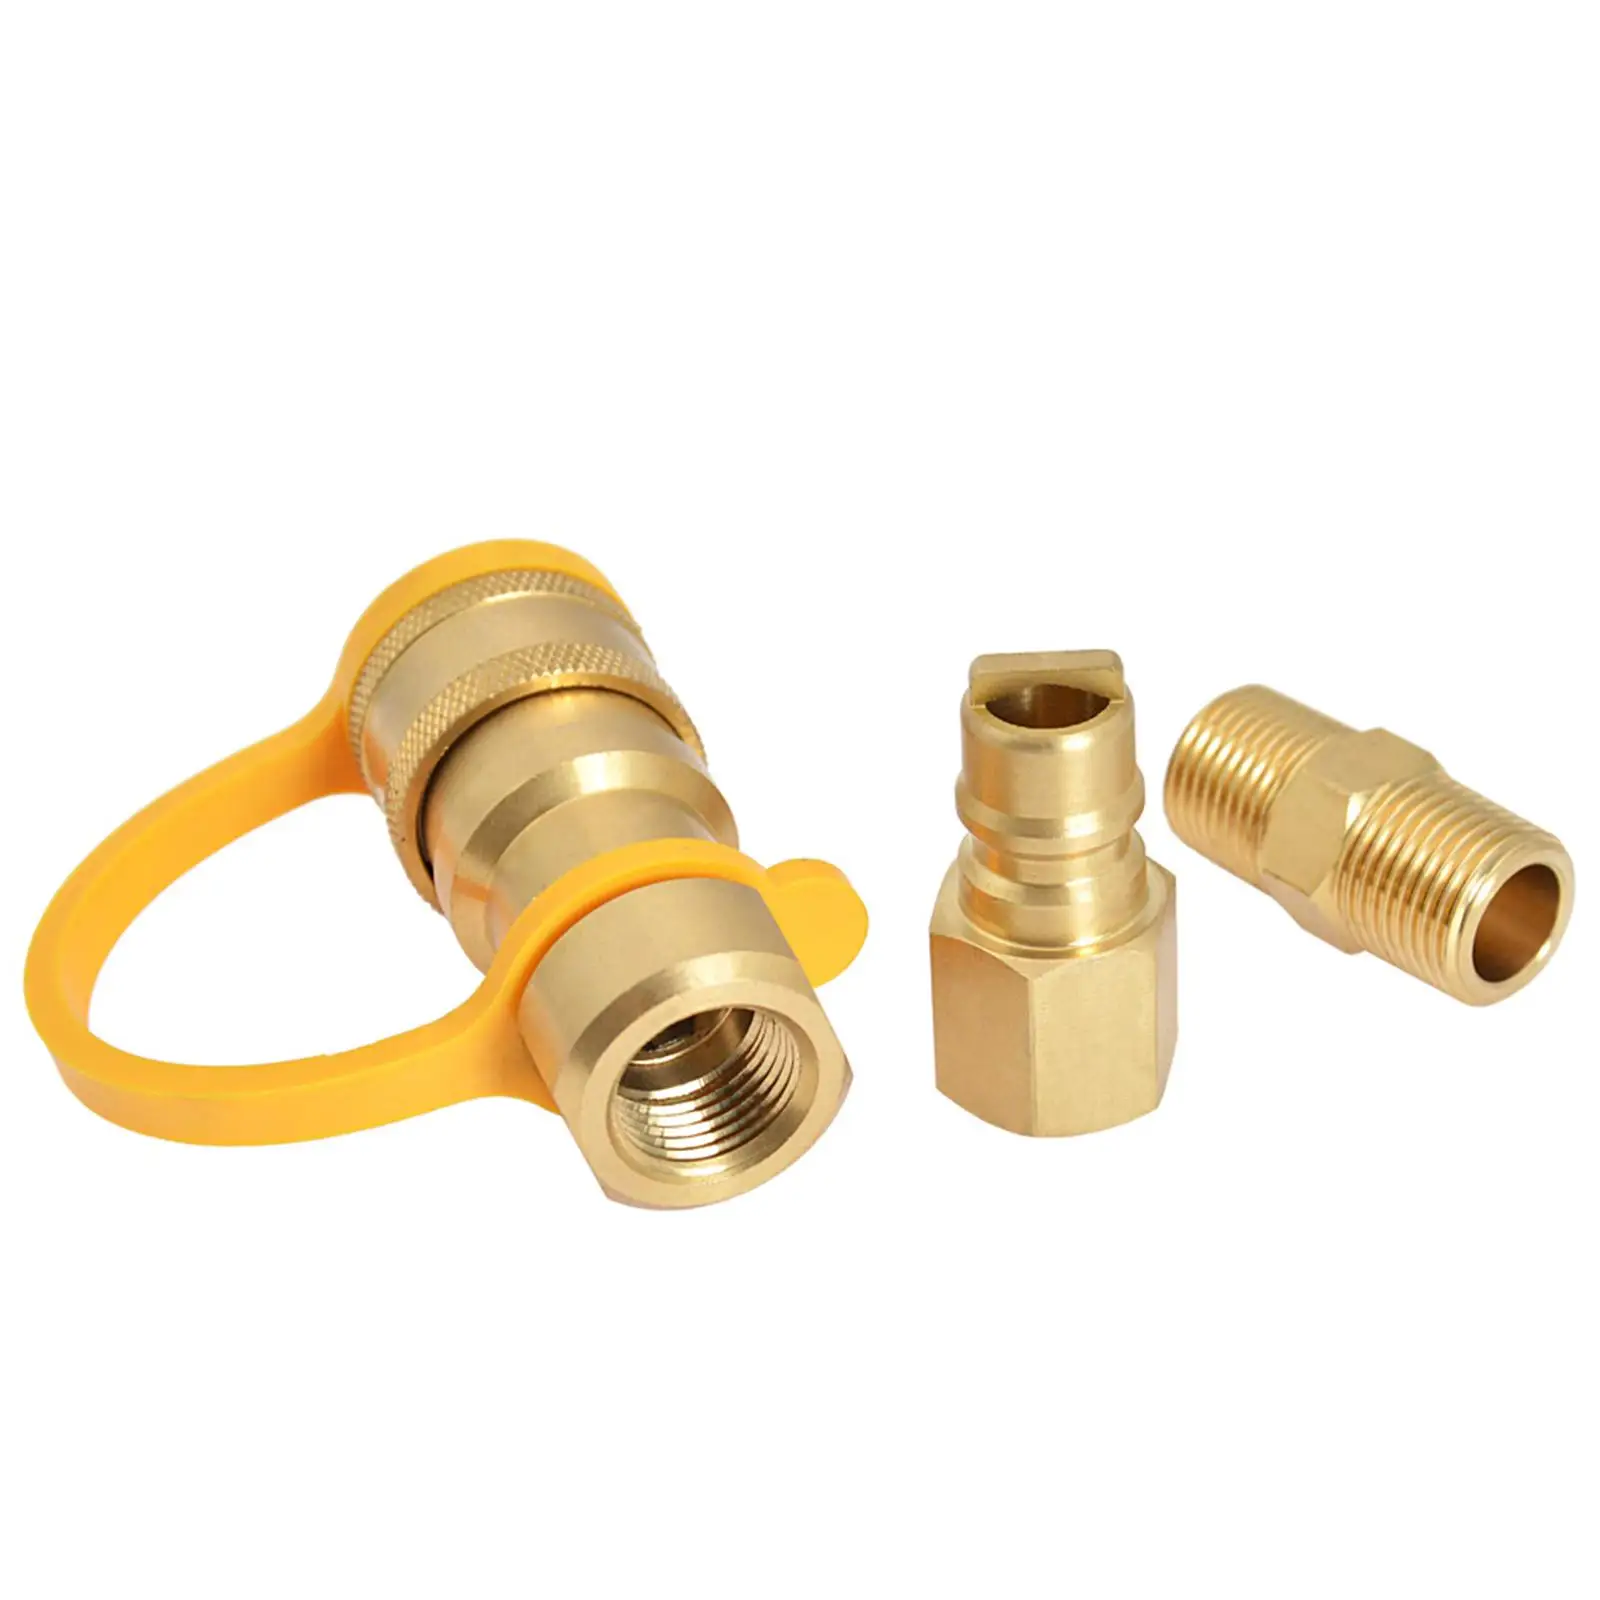 Propane Quick Connector Fitting 1lb Disposal Tank Regulator Adapter for Fire RV Cooker Accessories